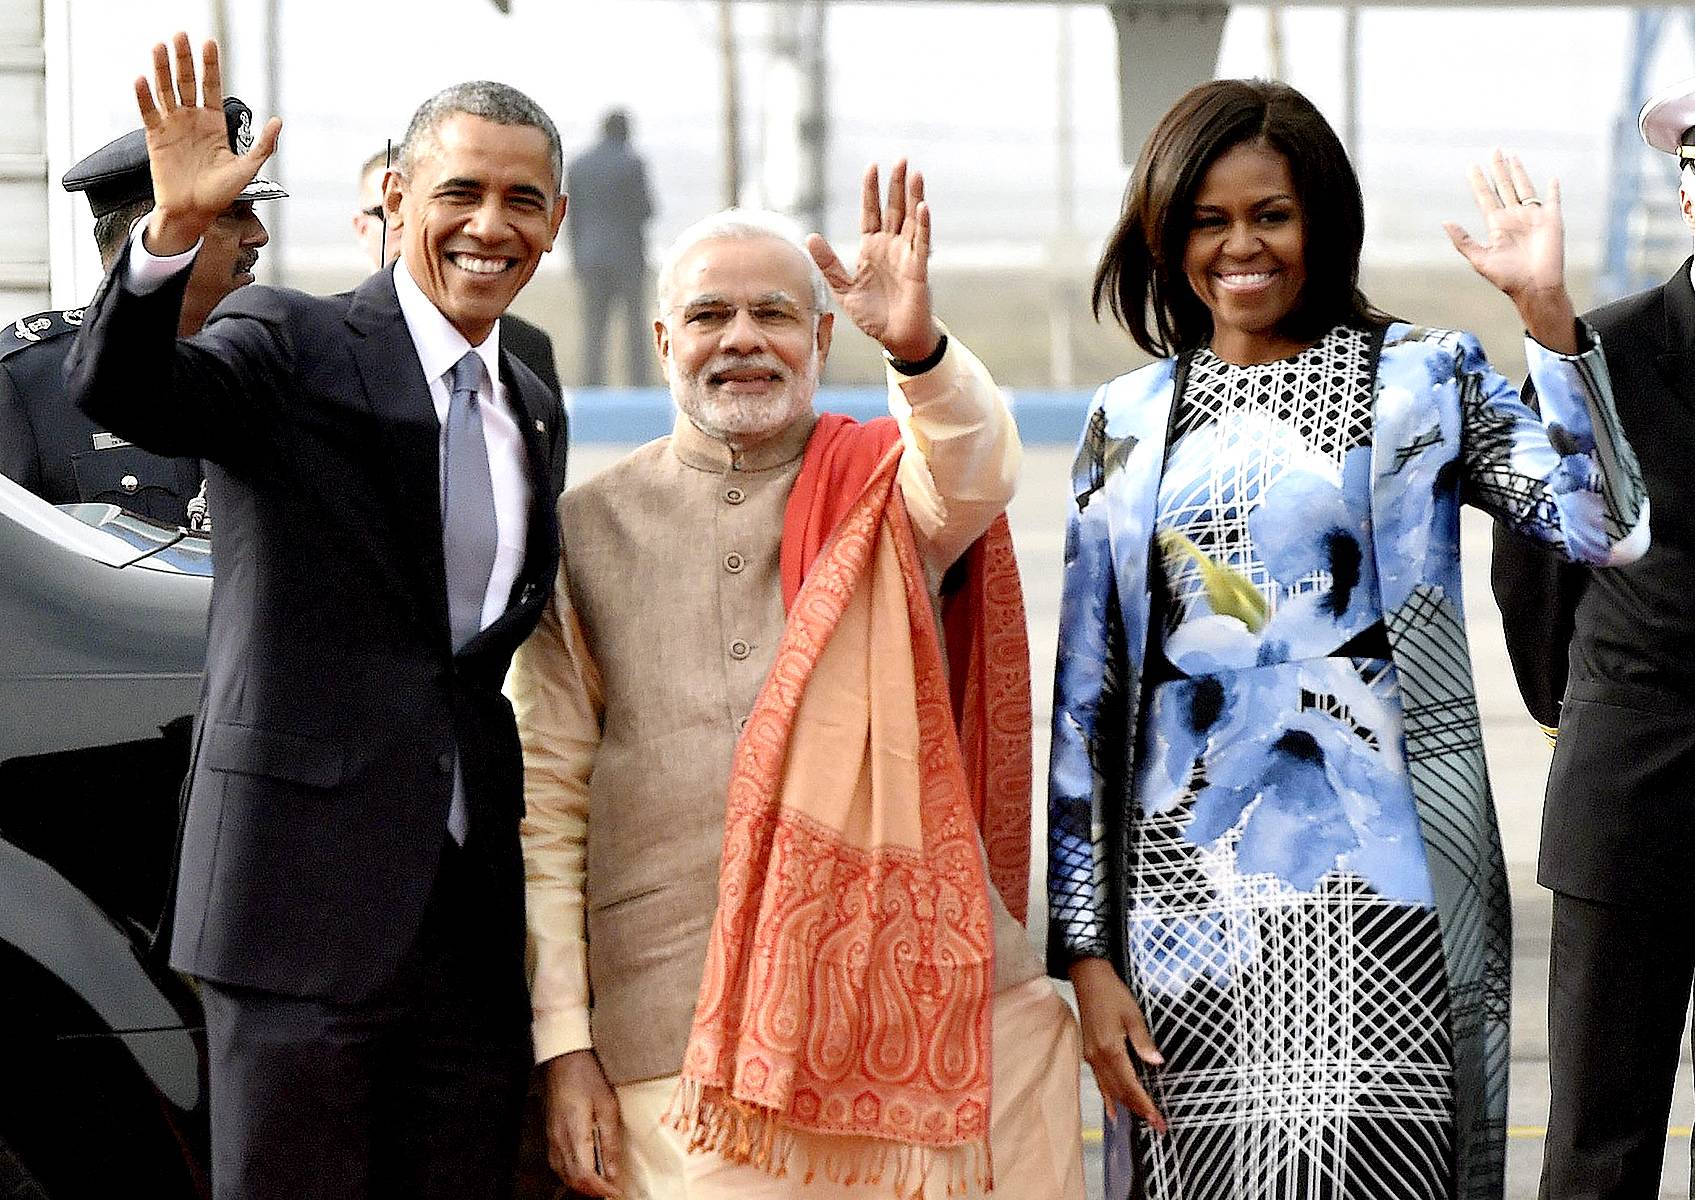 Narendra and Barack Who? - The president and first lady and Indian Prime Minister Narendra Modi wave as they arrive at Palam airport in New Delhi. The first lady, who has no official duties on this trip, dazzled the nation's fashion watchers the moment she stepped off of Air Force One in this floral dress and matching coat by Bibhu Mohapatra, a famous Indian-American designer who lives in New York. And rumor has it that the nation's weavers are planning to send the first lady 100 saris they've been working on for months.(Photo: EPA/STR /Landov)